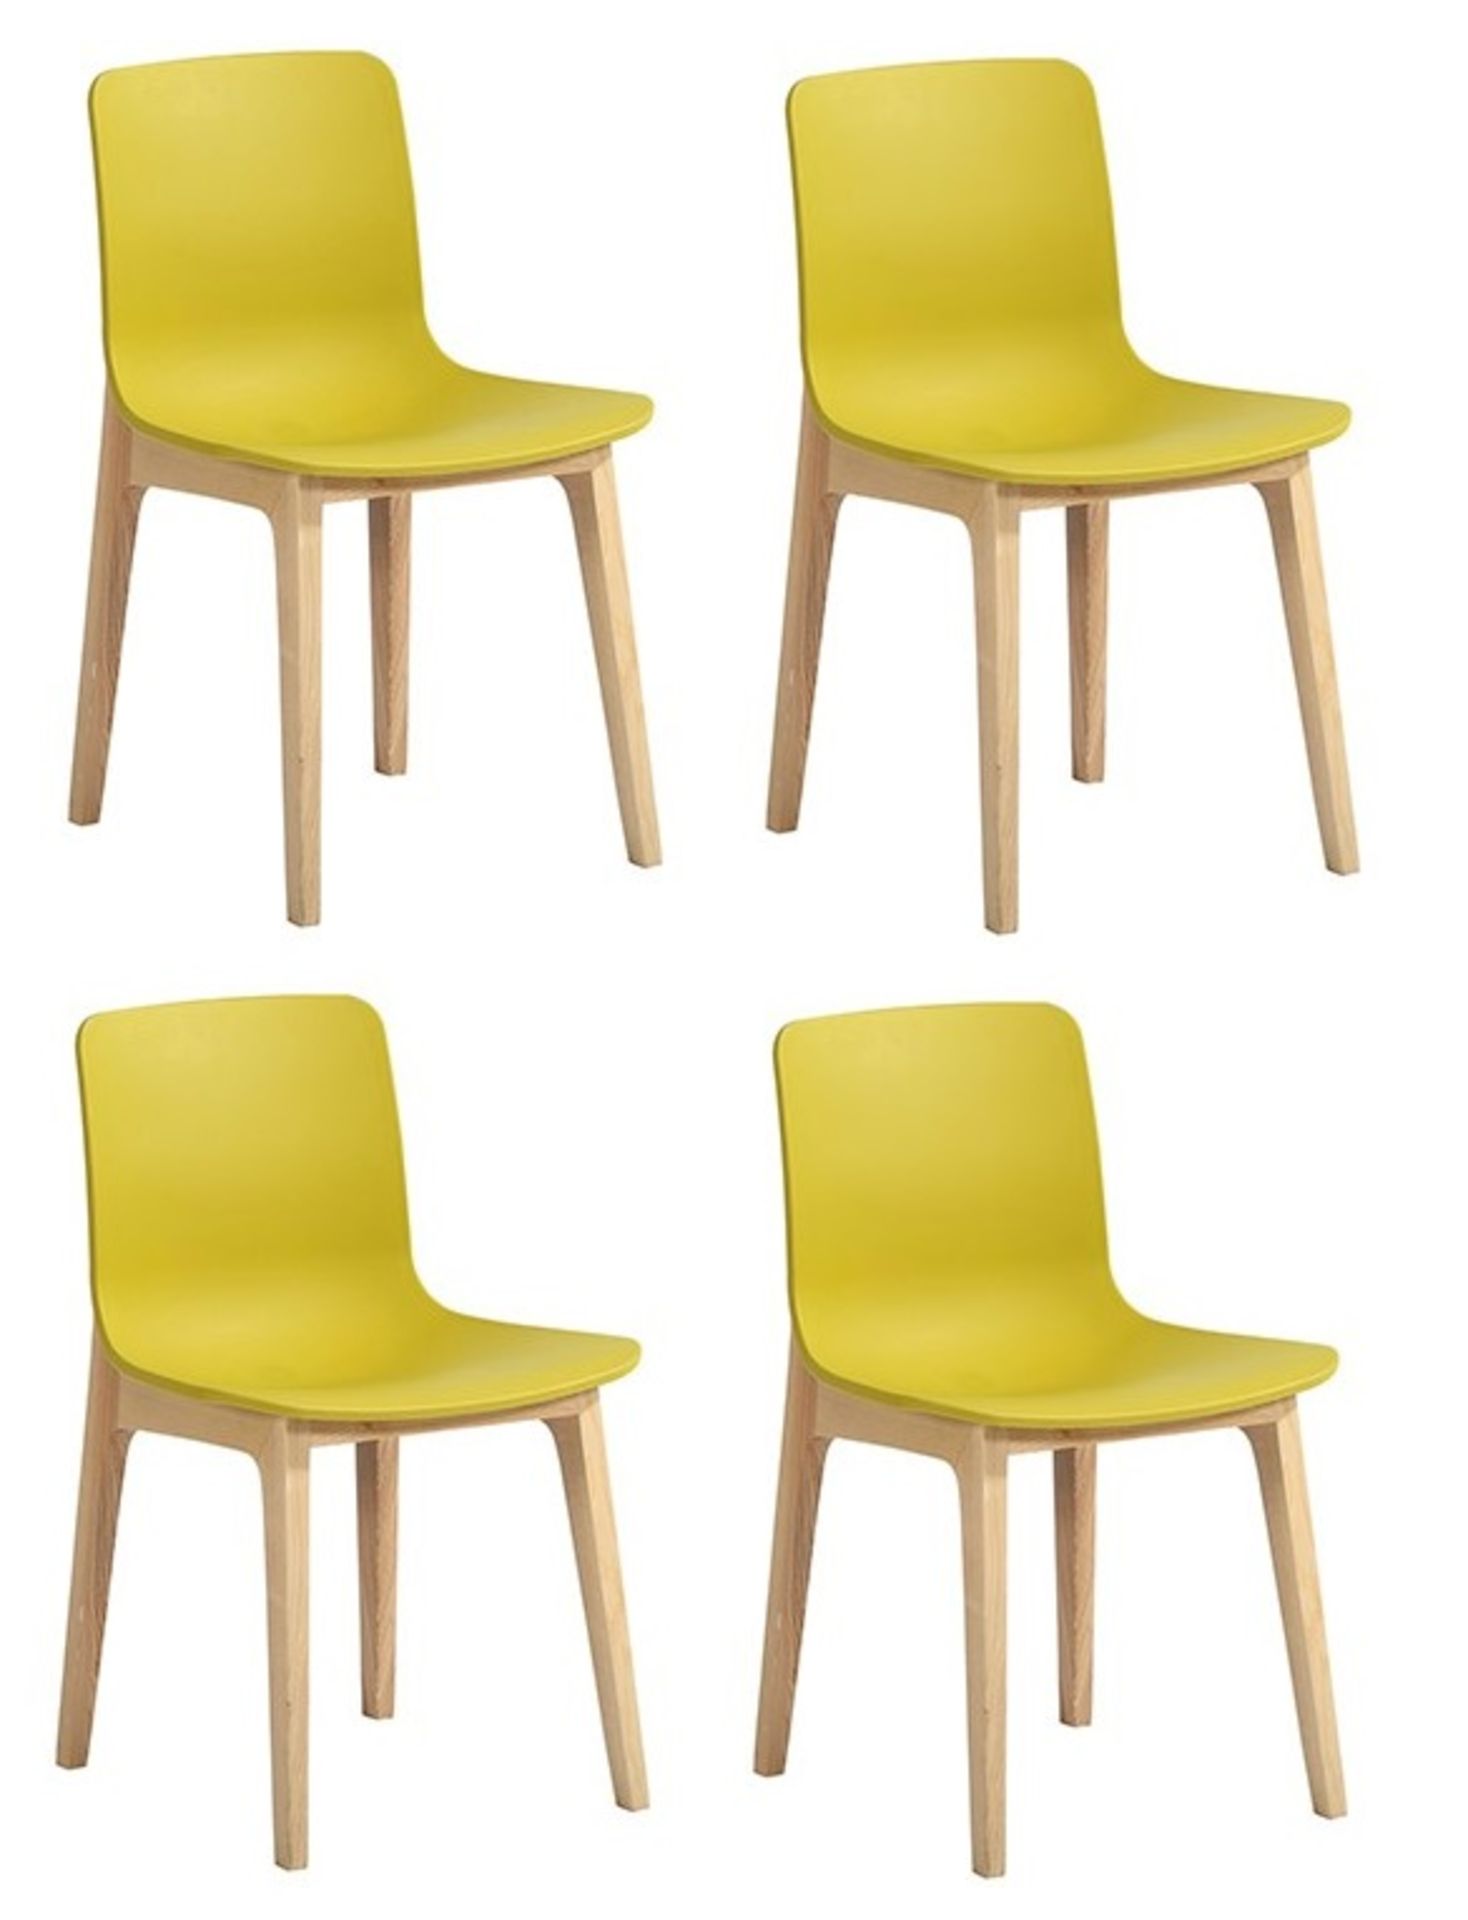 4 x Swift DC-782W Dining Chairs With Chartreuse ABS Seats and Natural Wood Bases - Approx RRP £360!